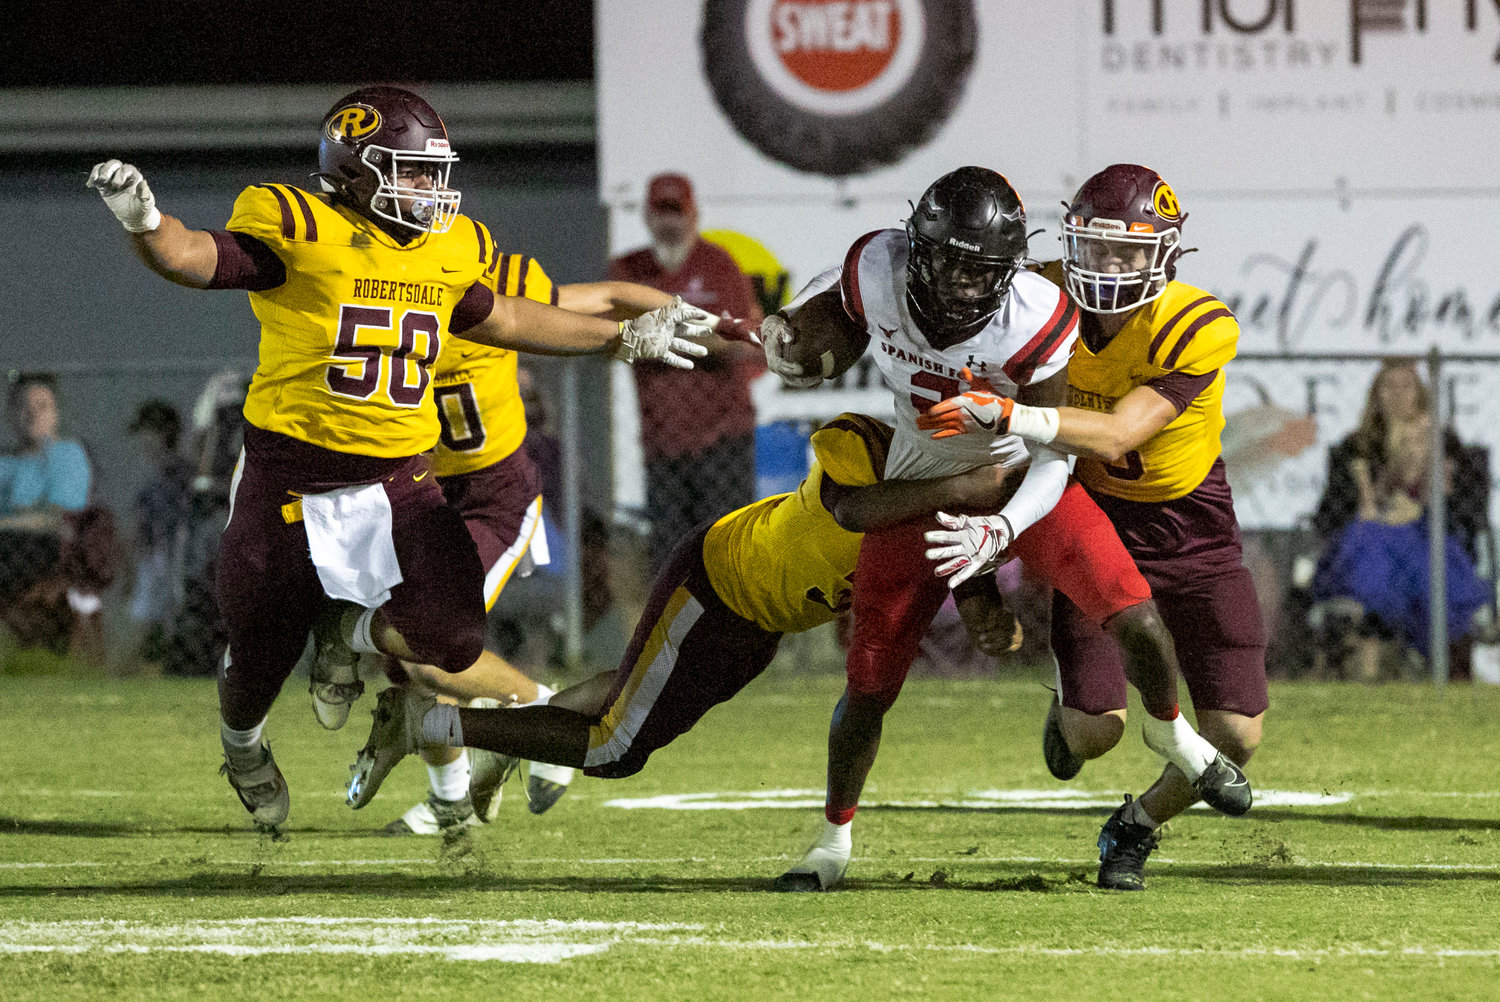 Spanish Fort receiver Khamron Jackson is corralled by a group of Robertsdale Golden Bears after a catch in the first half of the Class 6A Region 1 game at J. D. Sellars Stadium Friday, Oct. 14.